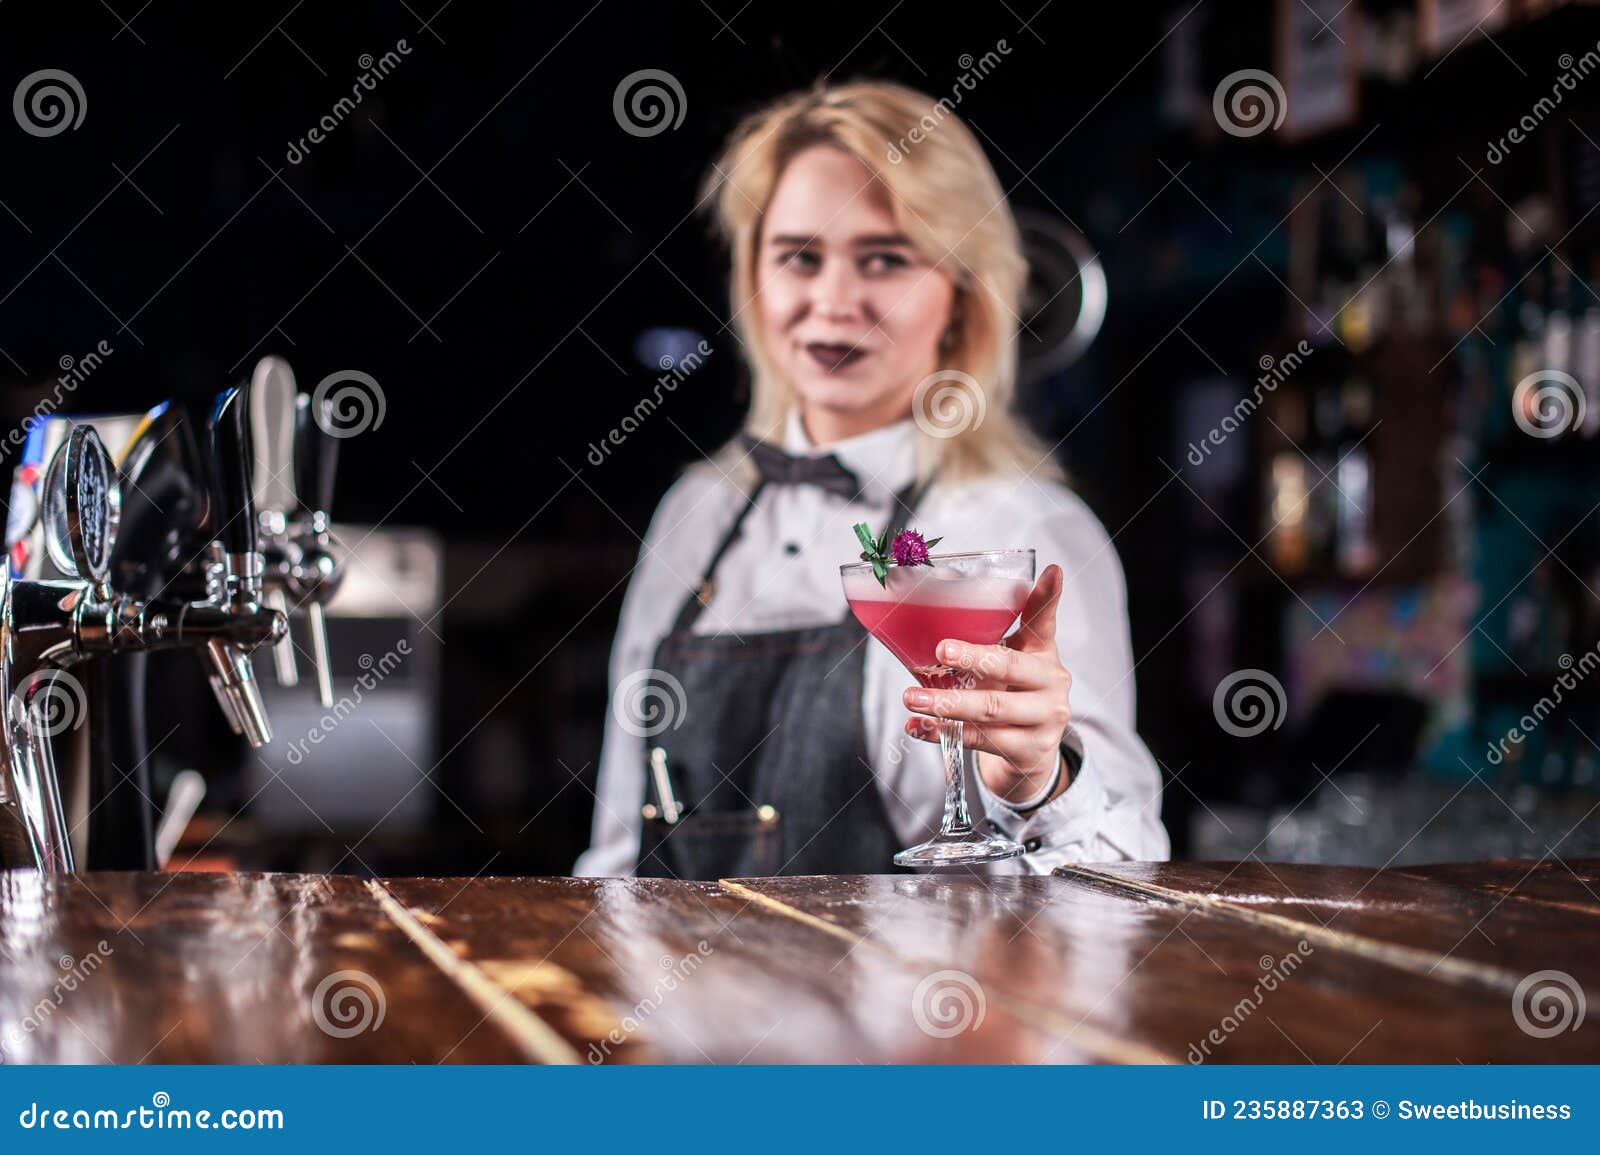 Professional Girl Bartending Places the Finishing Touches on a Drink ...